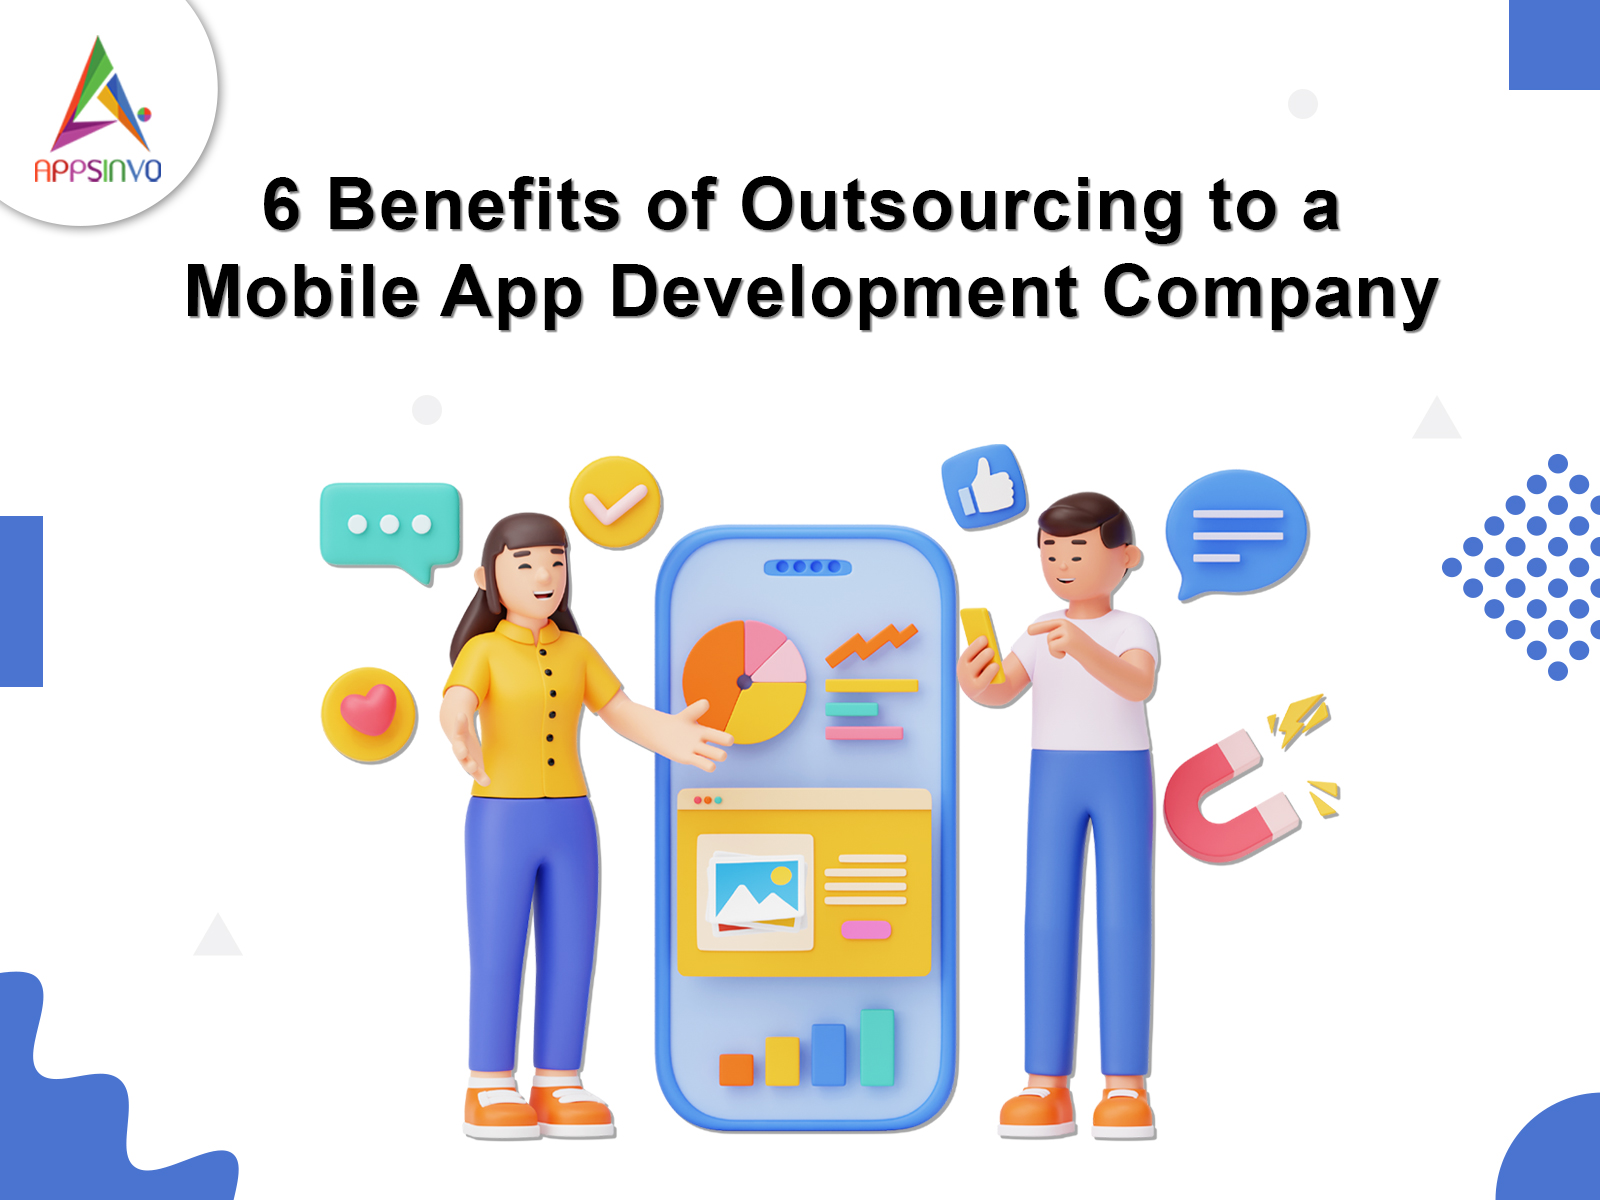 6 Benefits of Outsourcing to a Mobile App Development Company | Appsinvo Blog